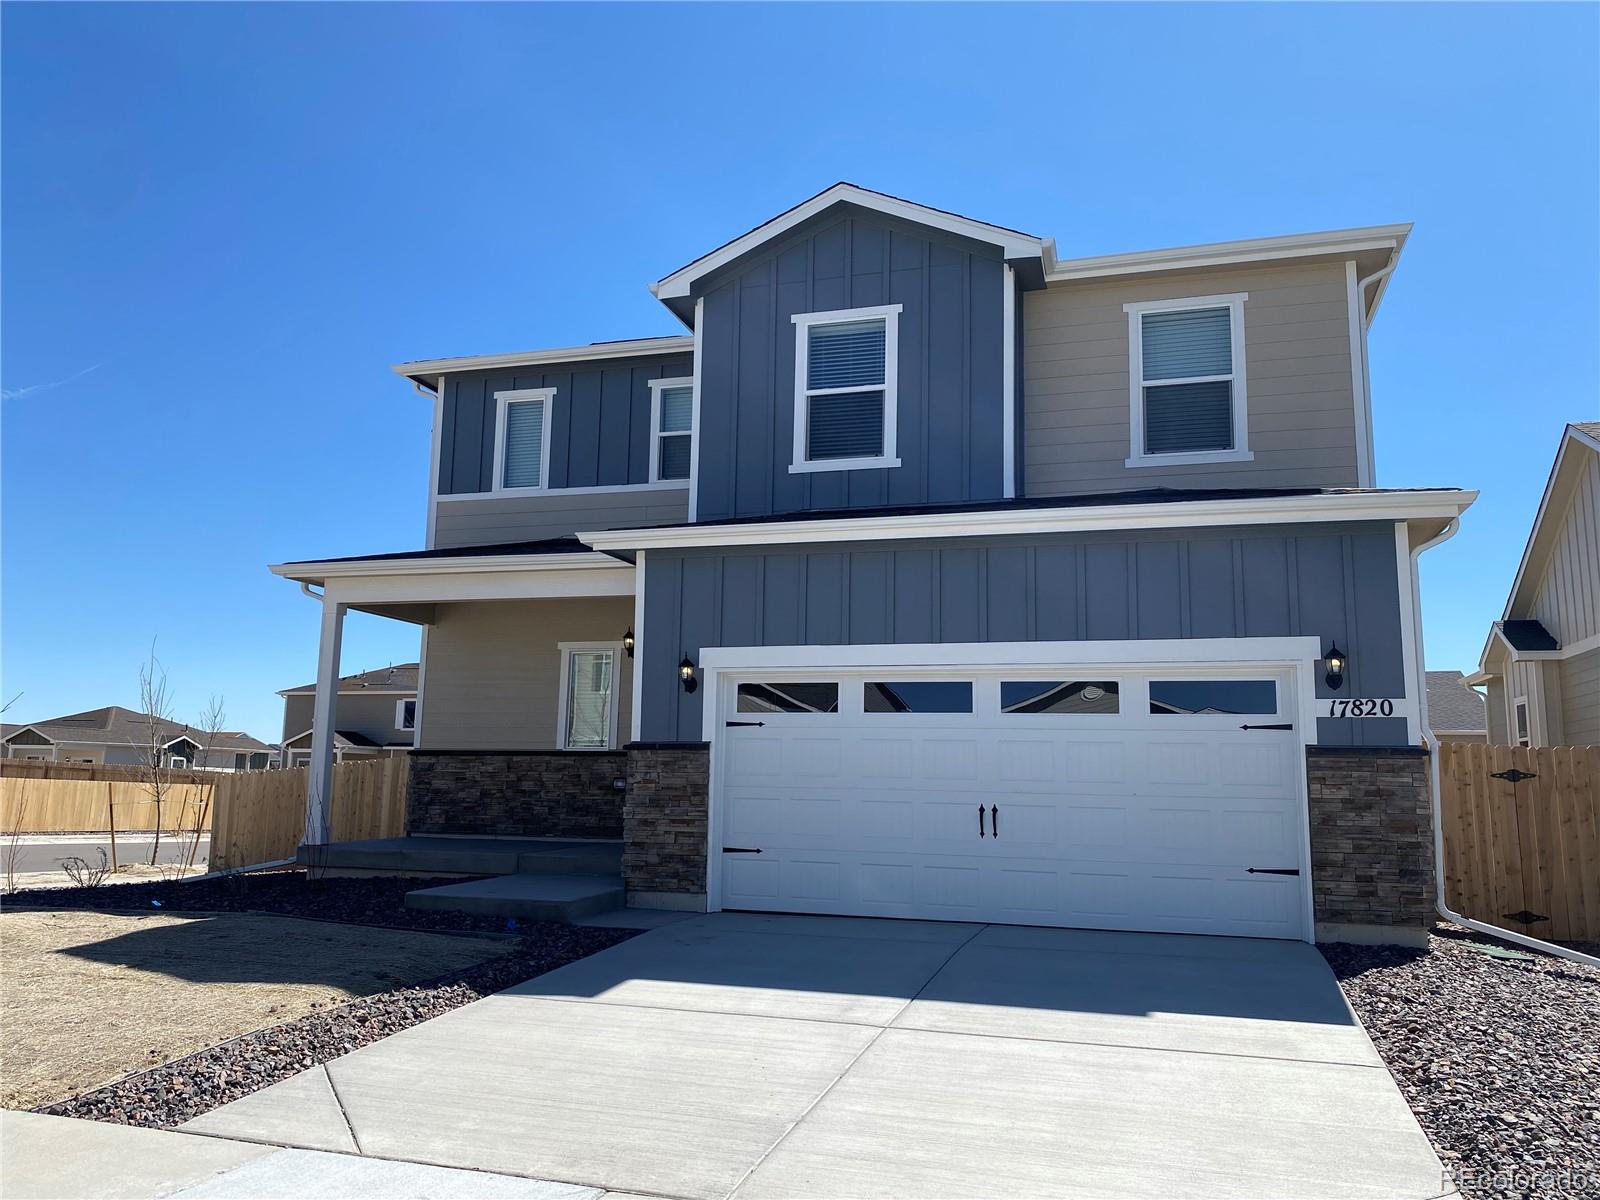 17820 E 95th Place, commerce city MLS: 1963027 Beds: 3 Baths: 3 Price: $560,900